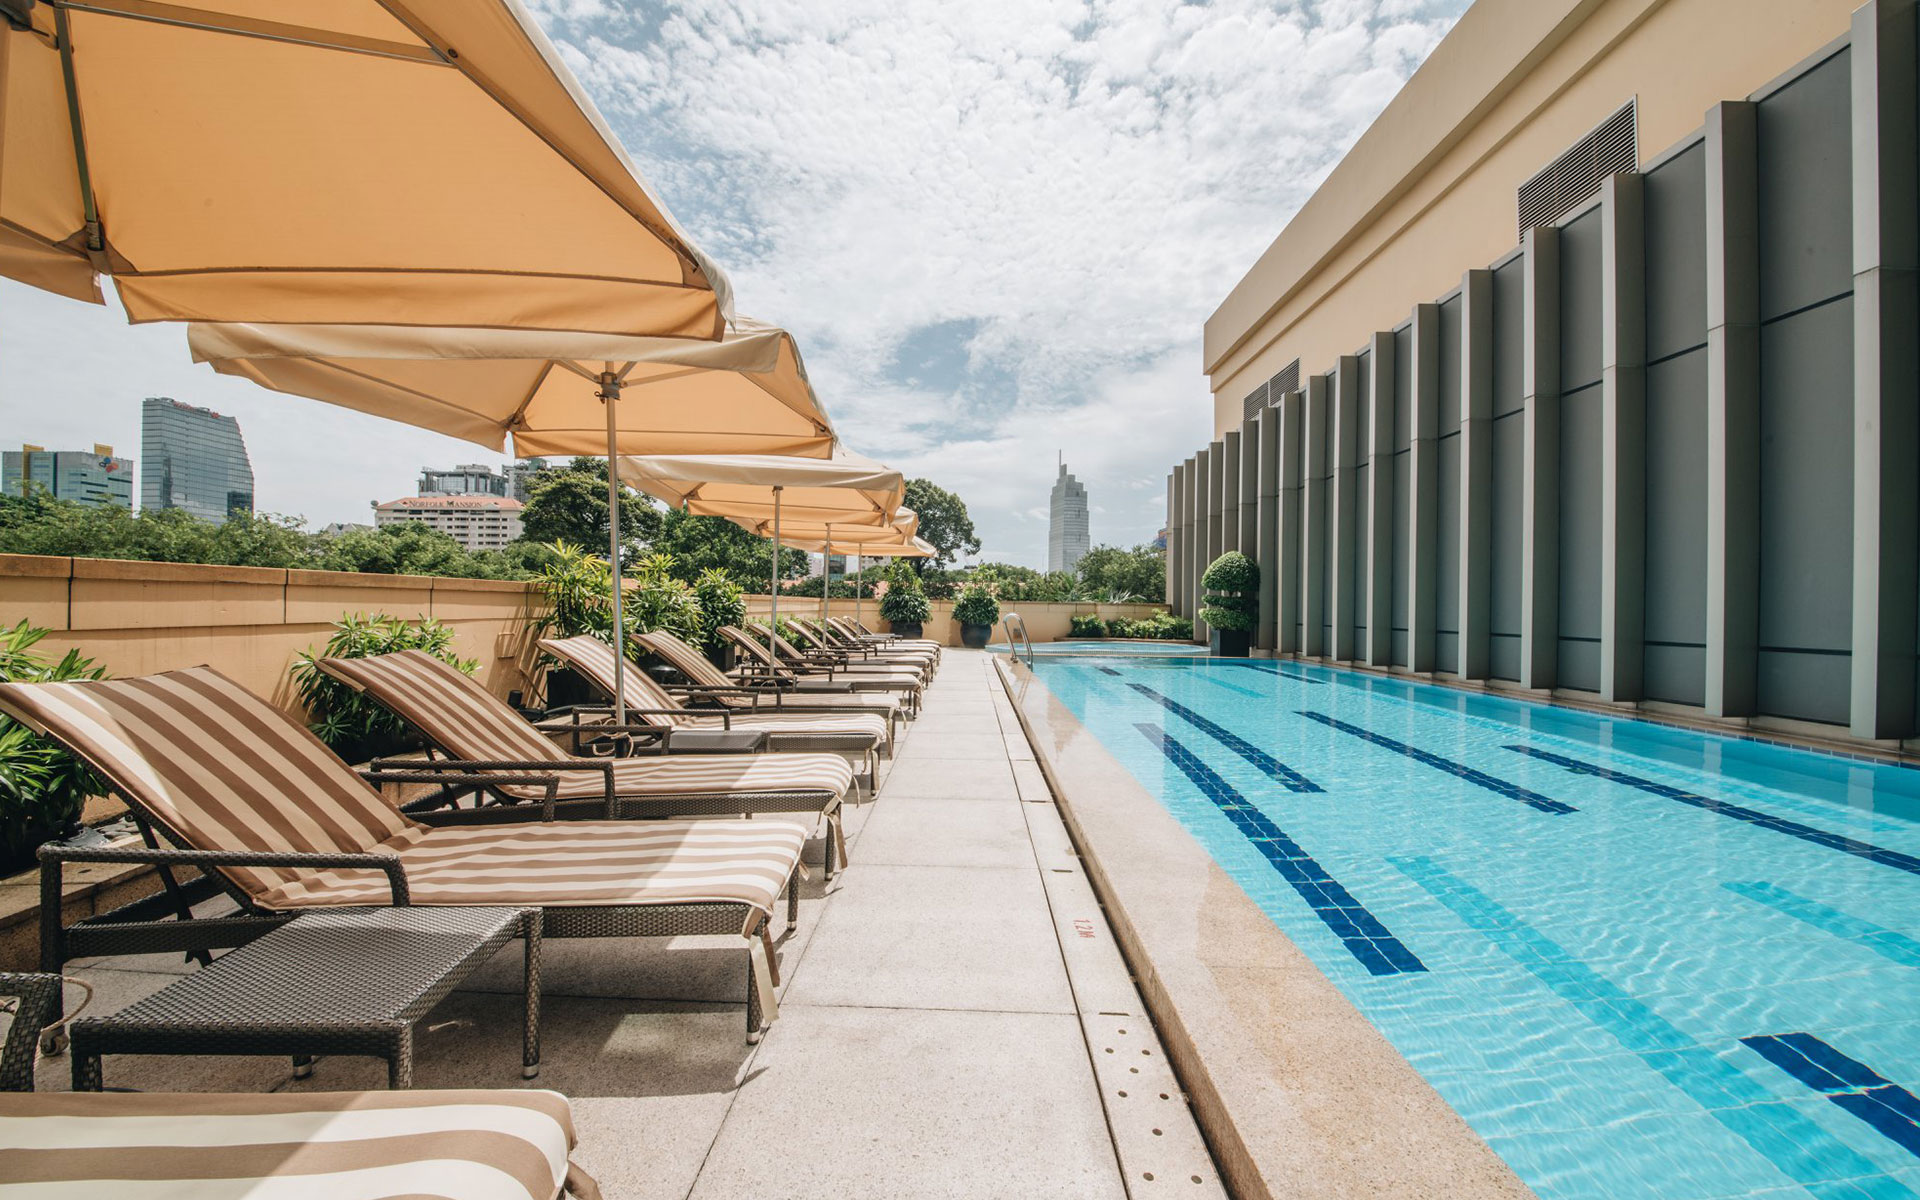 The outdoor pool on the third floor of InterContinental Saigon Hotel